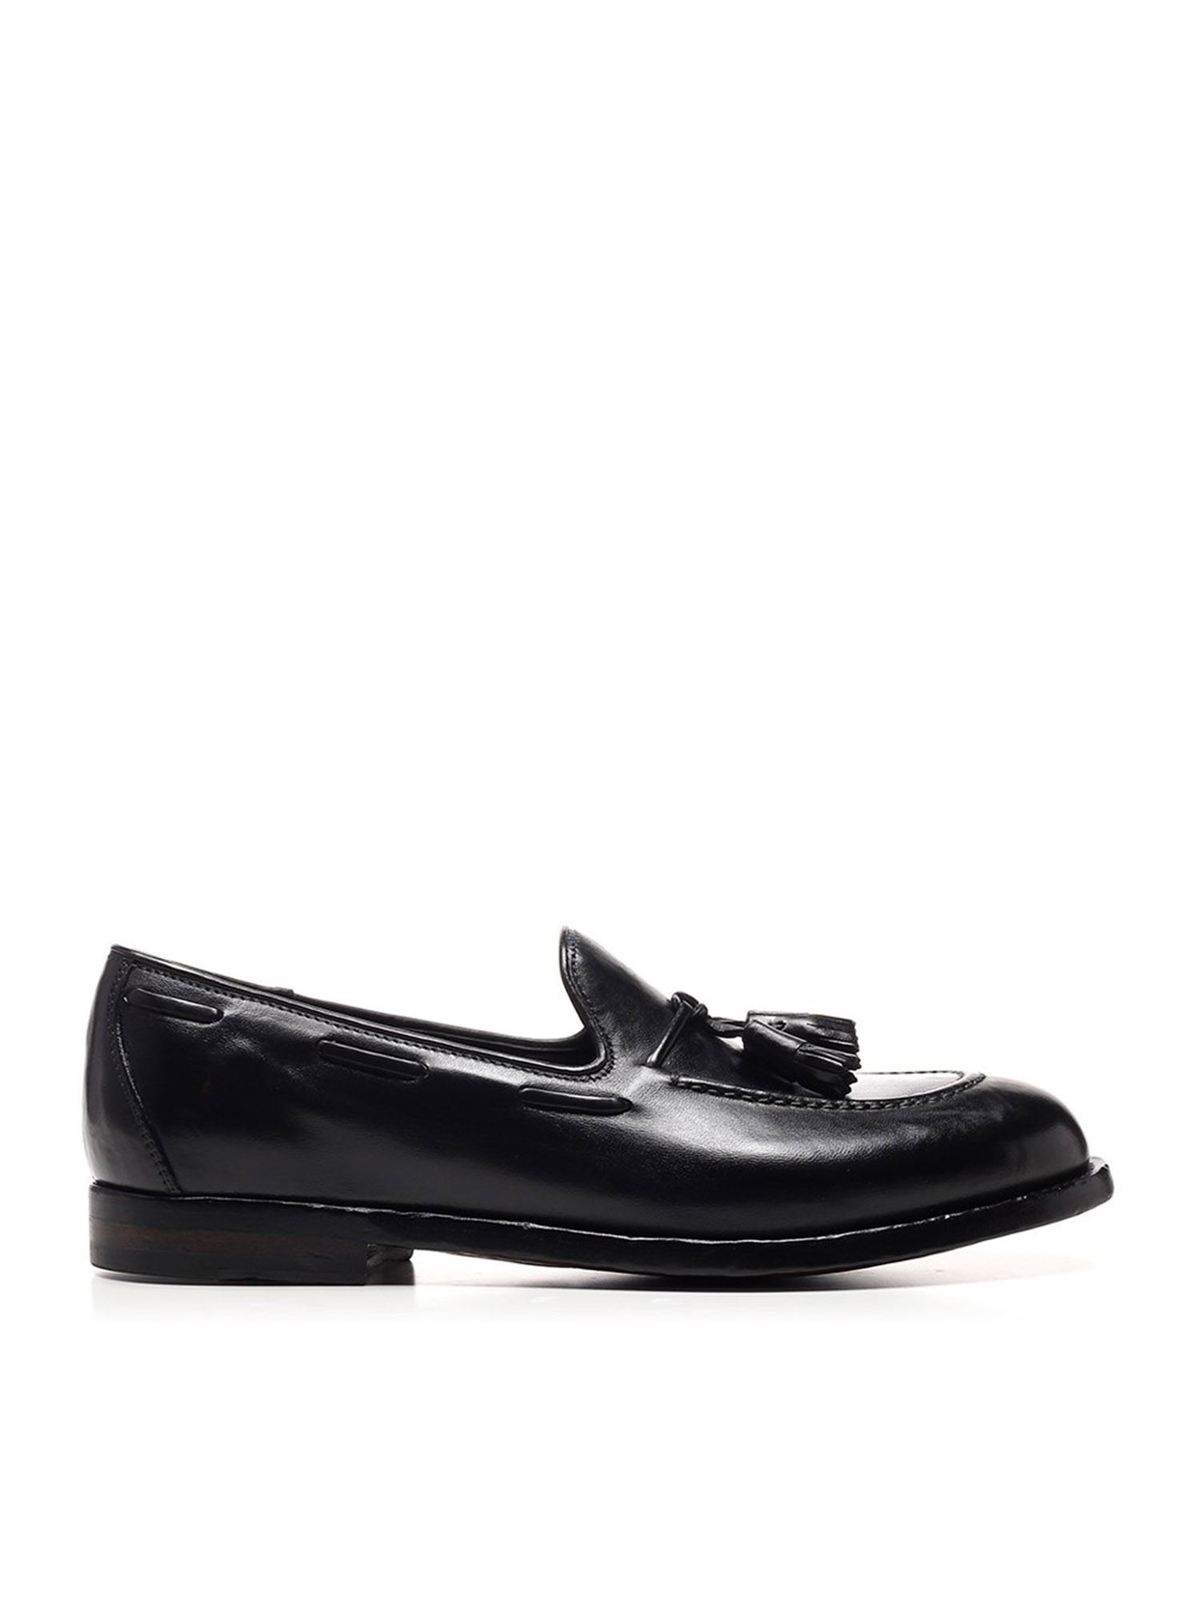 OFFICINE CREATIVE IVY 1 LOAFERS IN BLACK